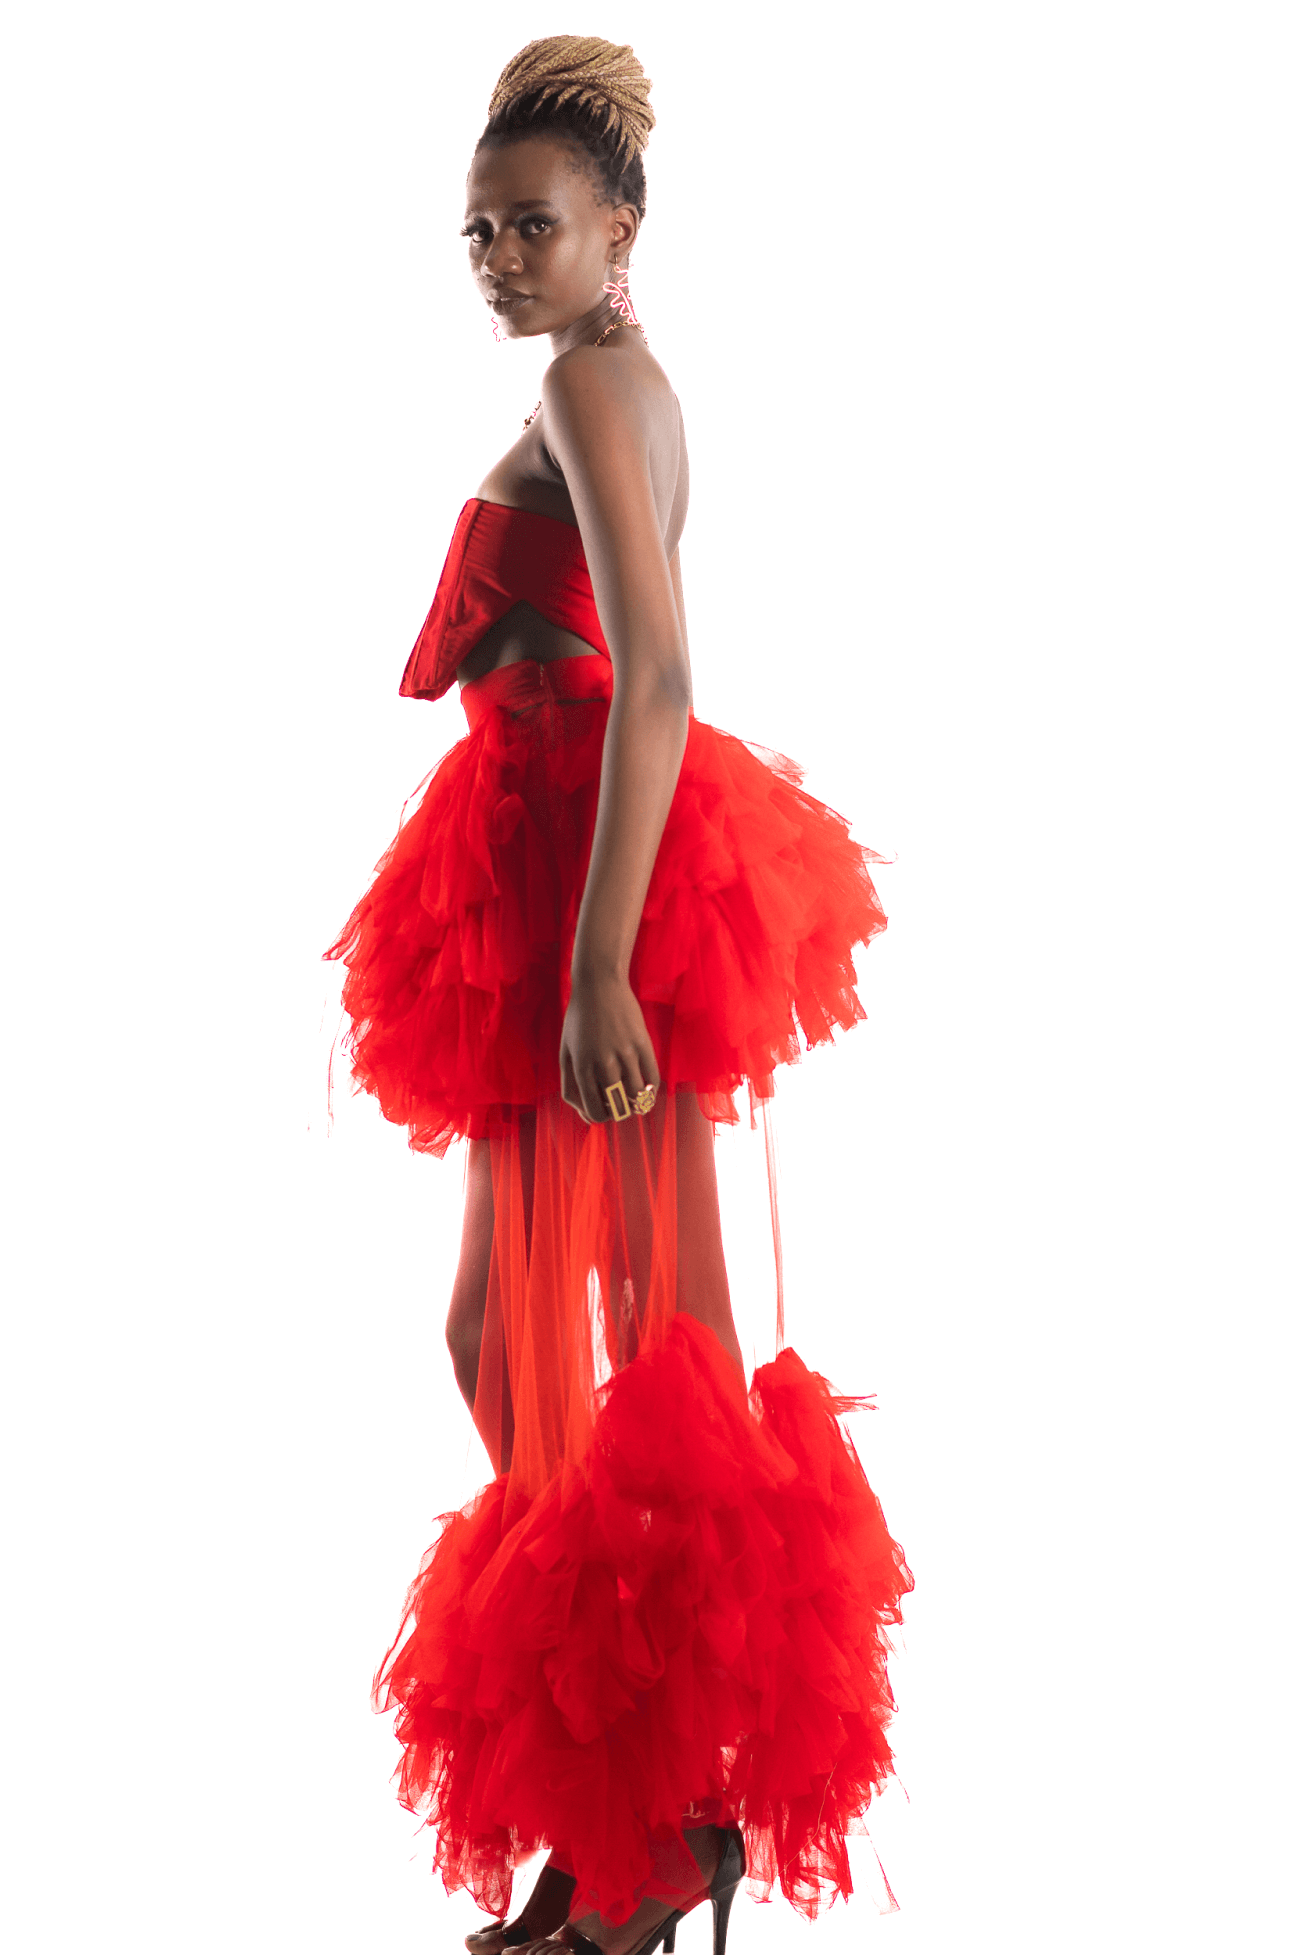 Shop Set of 2: Tulle Skirt and Corset Top by Eva Wambutu on Arrai. Discover stylish, affordable clothing, jewelry, handbags and unique handmade pieces from top Kenyan & African fashion brands prioritising sustainability and quality craftsmanship.